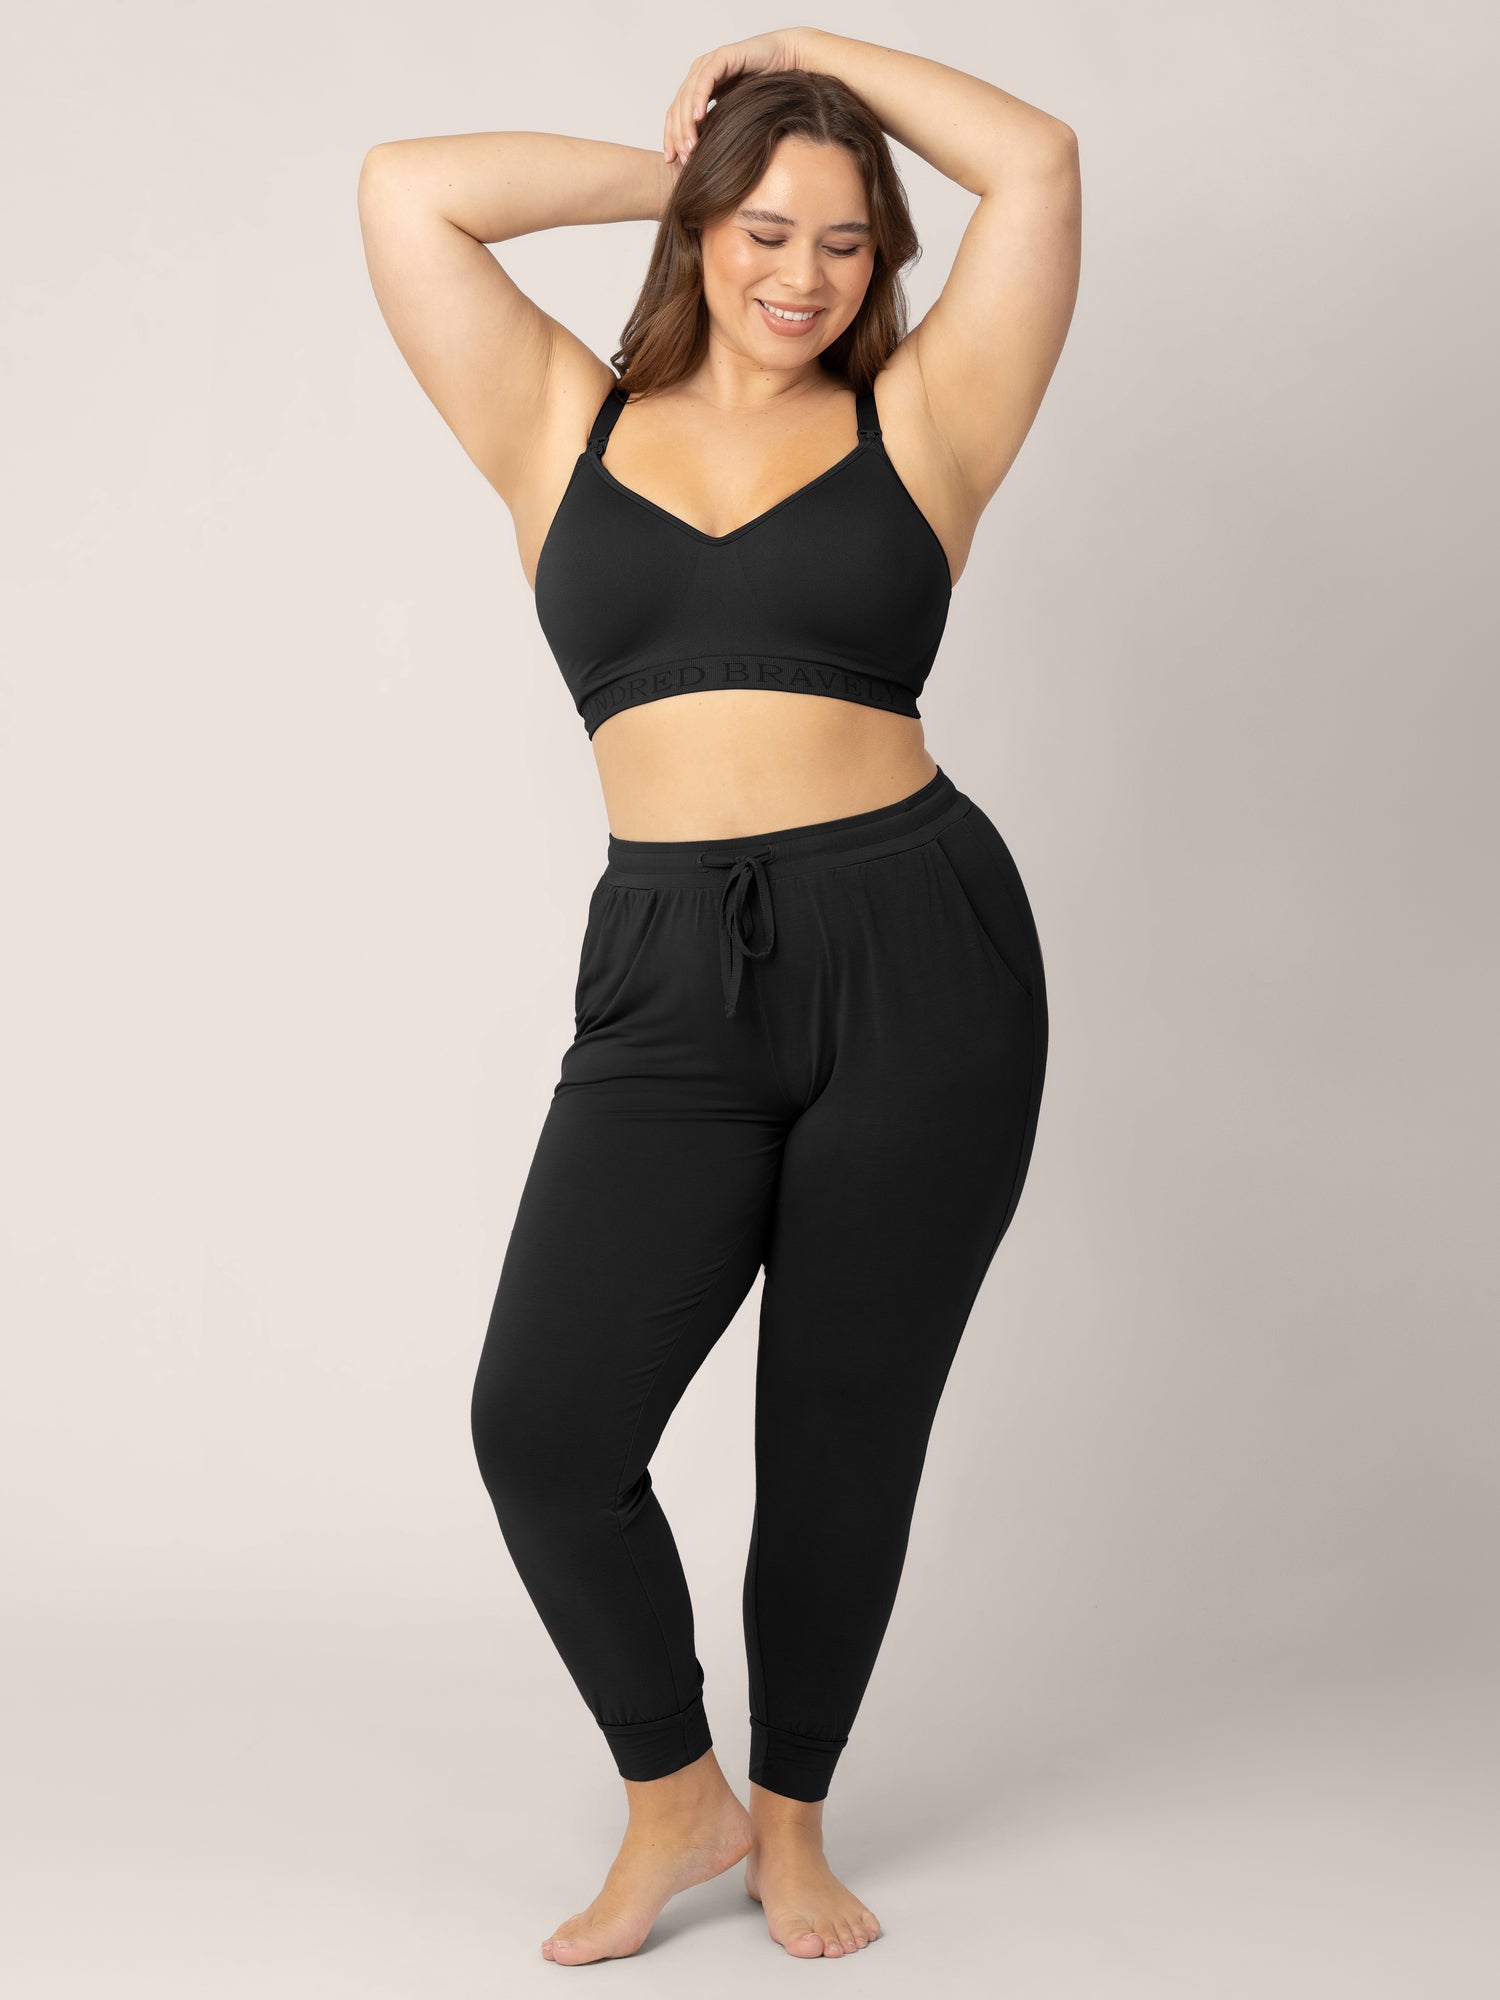 Model wearing the Everyday Lounge Jogger in Black